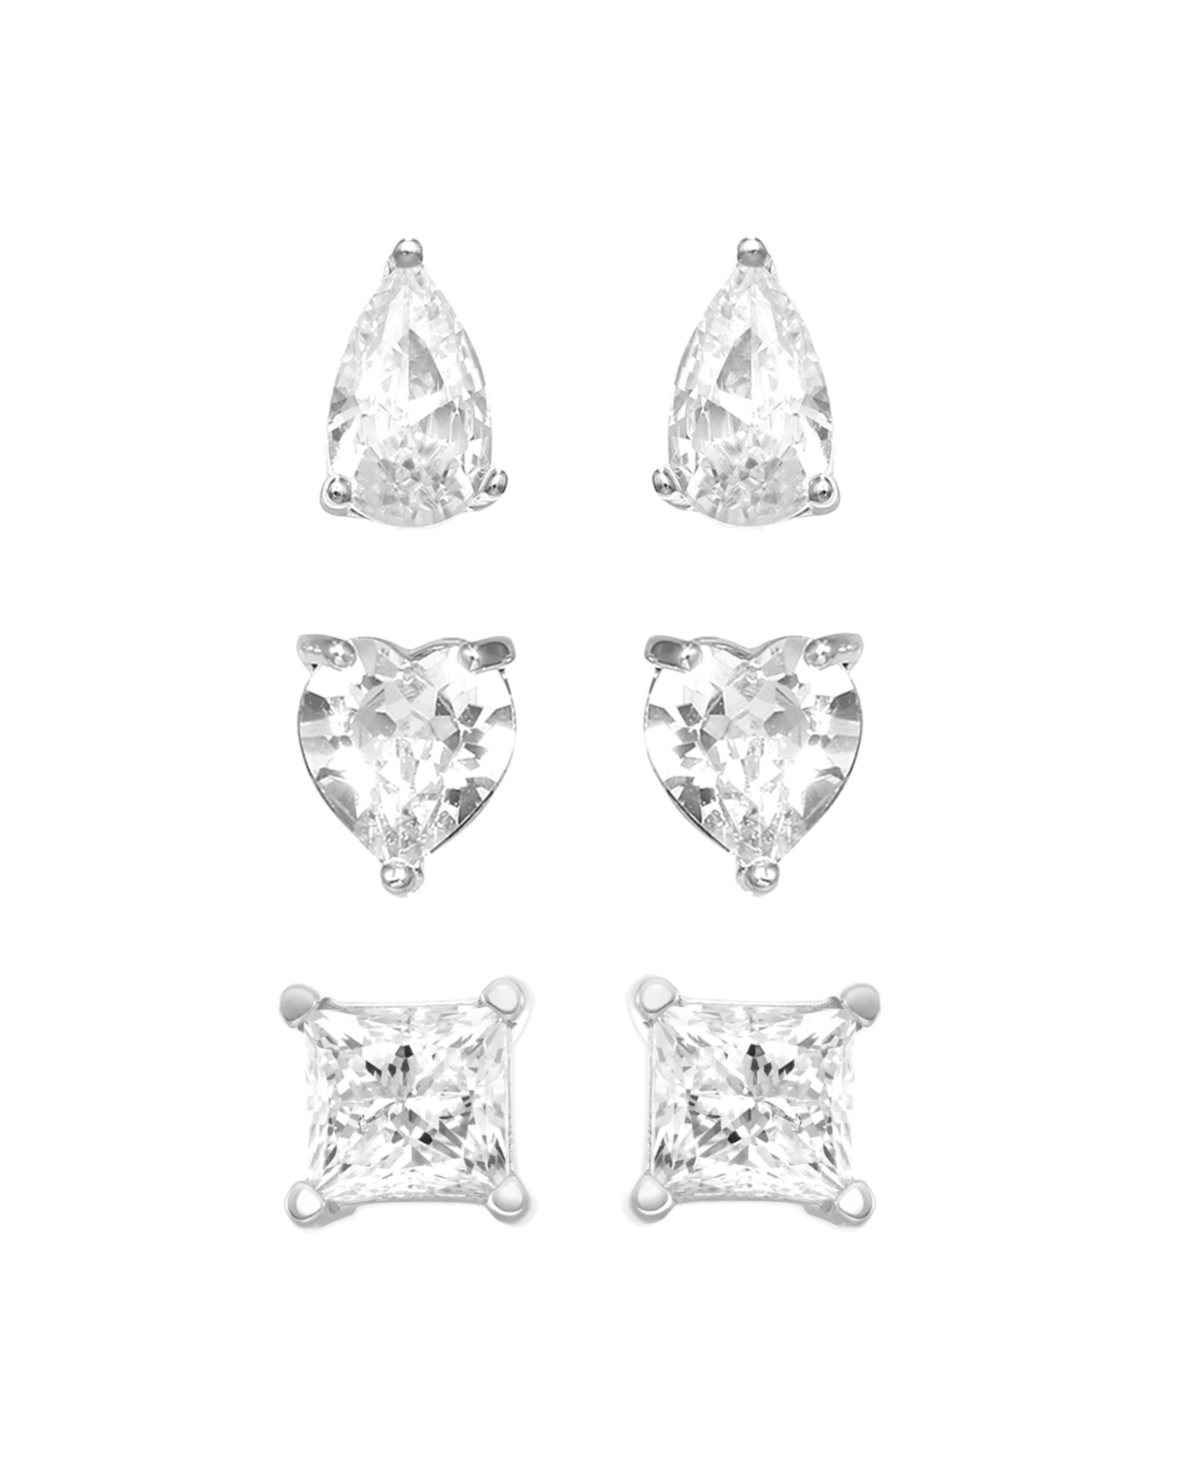 3pc Set Cubic Zirconia Stud Earrings Silver Plated - Silver